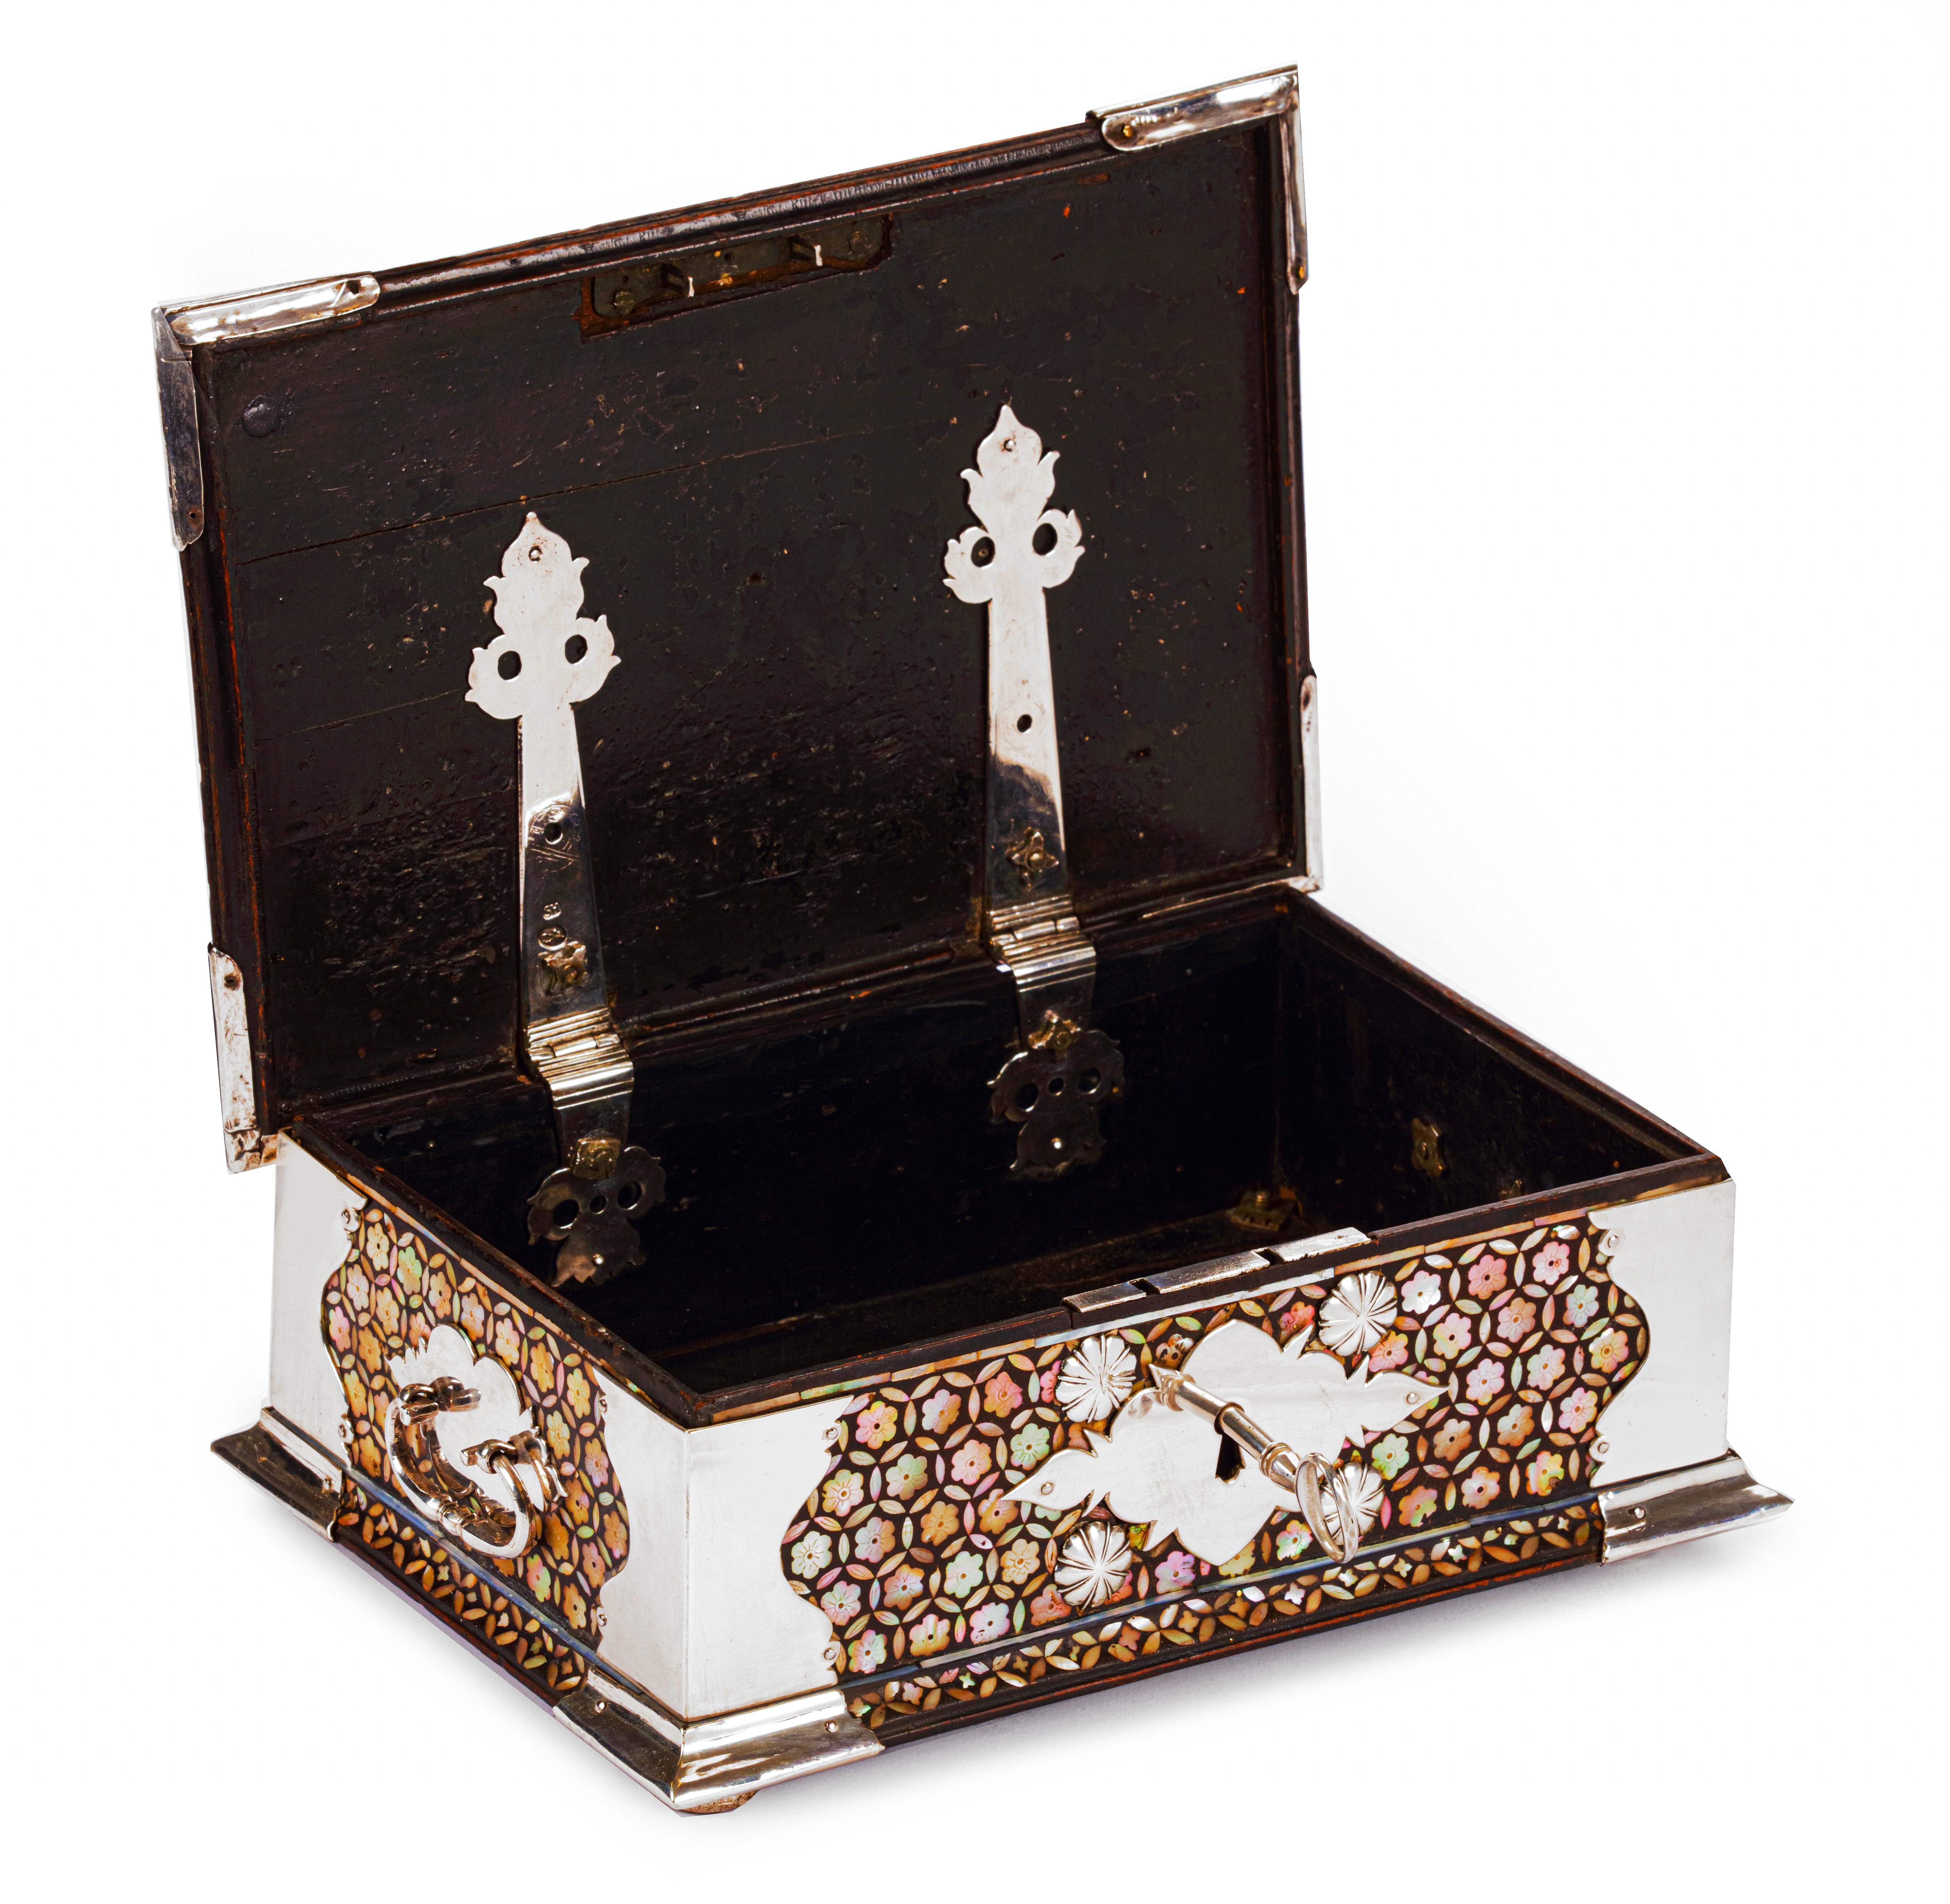 Dutch Colonial 18th-century Dutch-colonial Peranakan mother-of-pearl casket with silver mounts For Sale